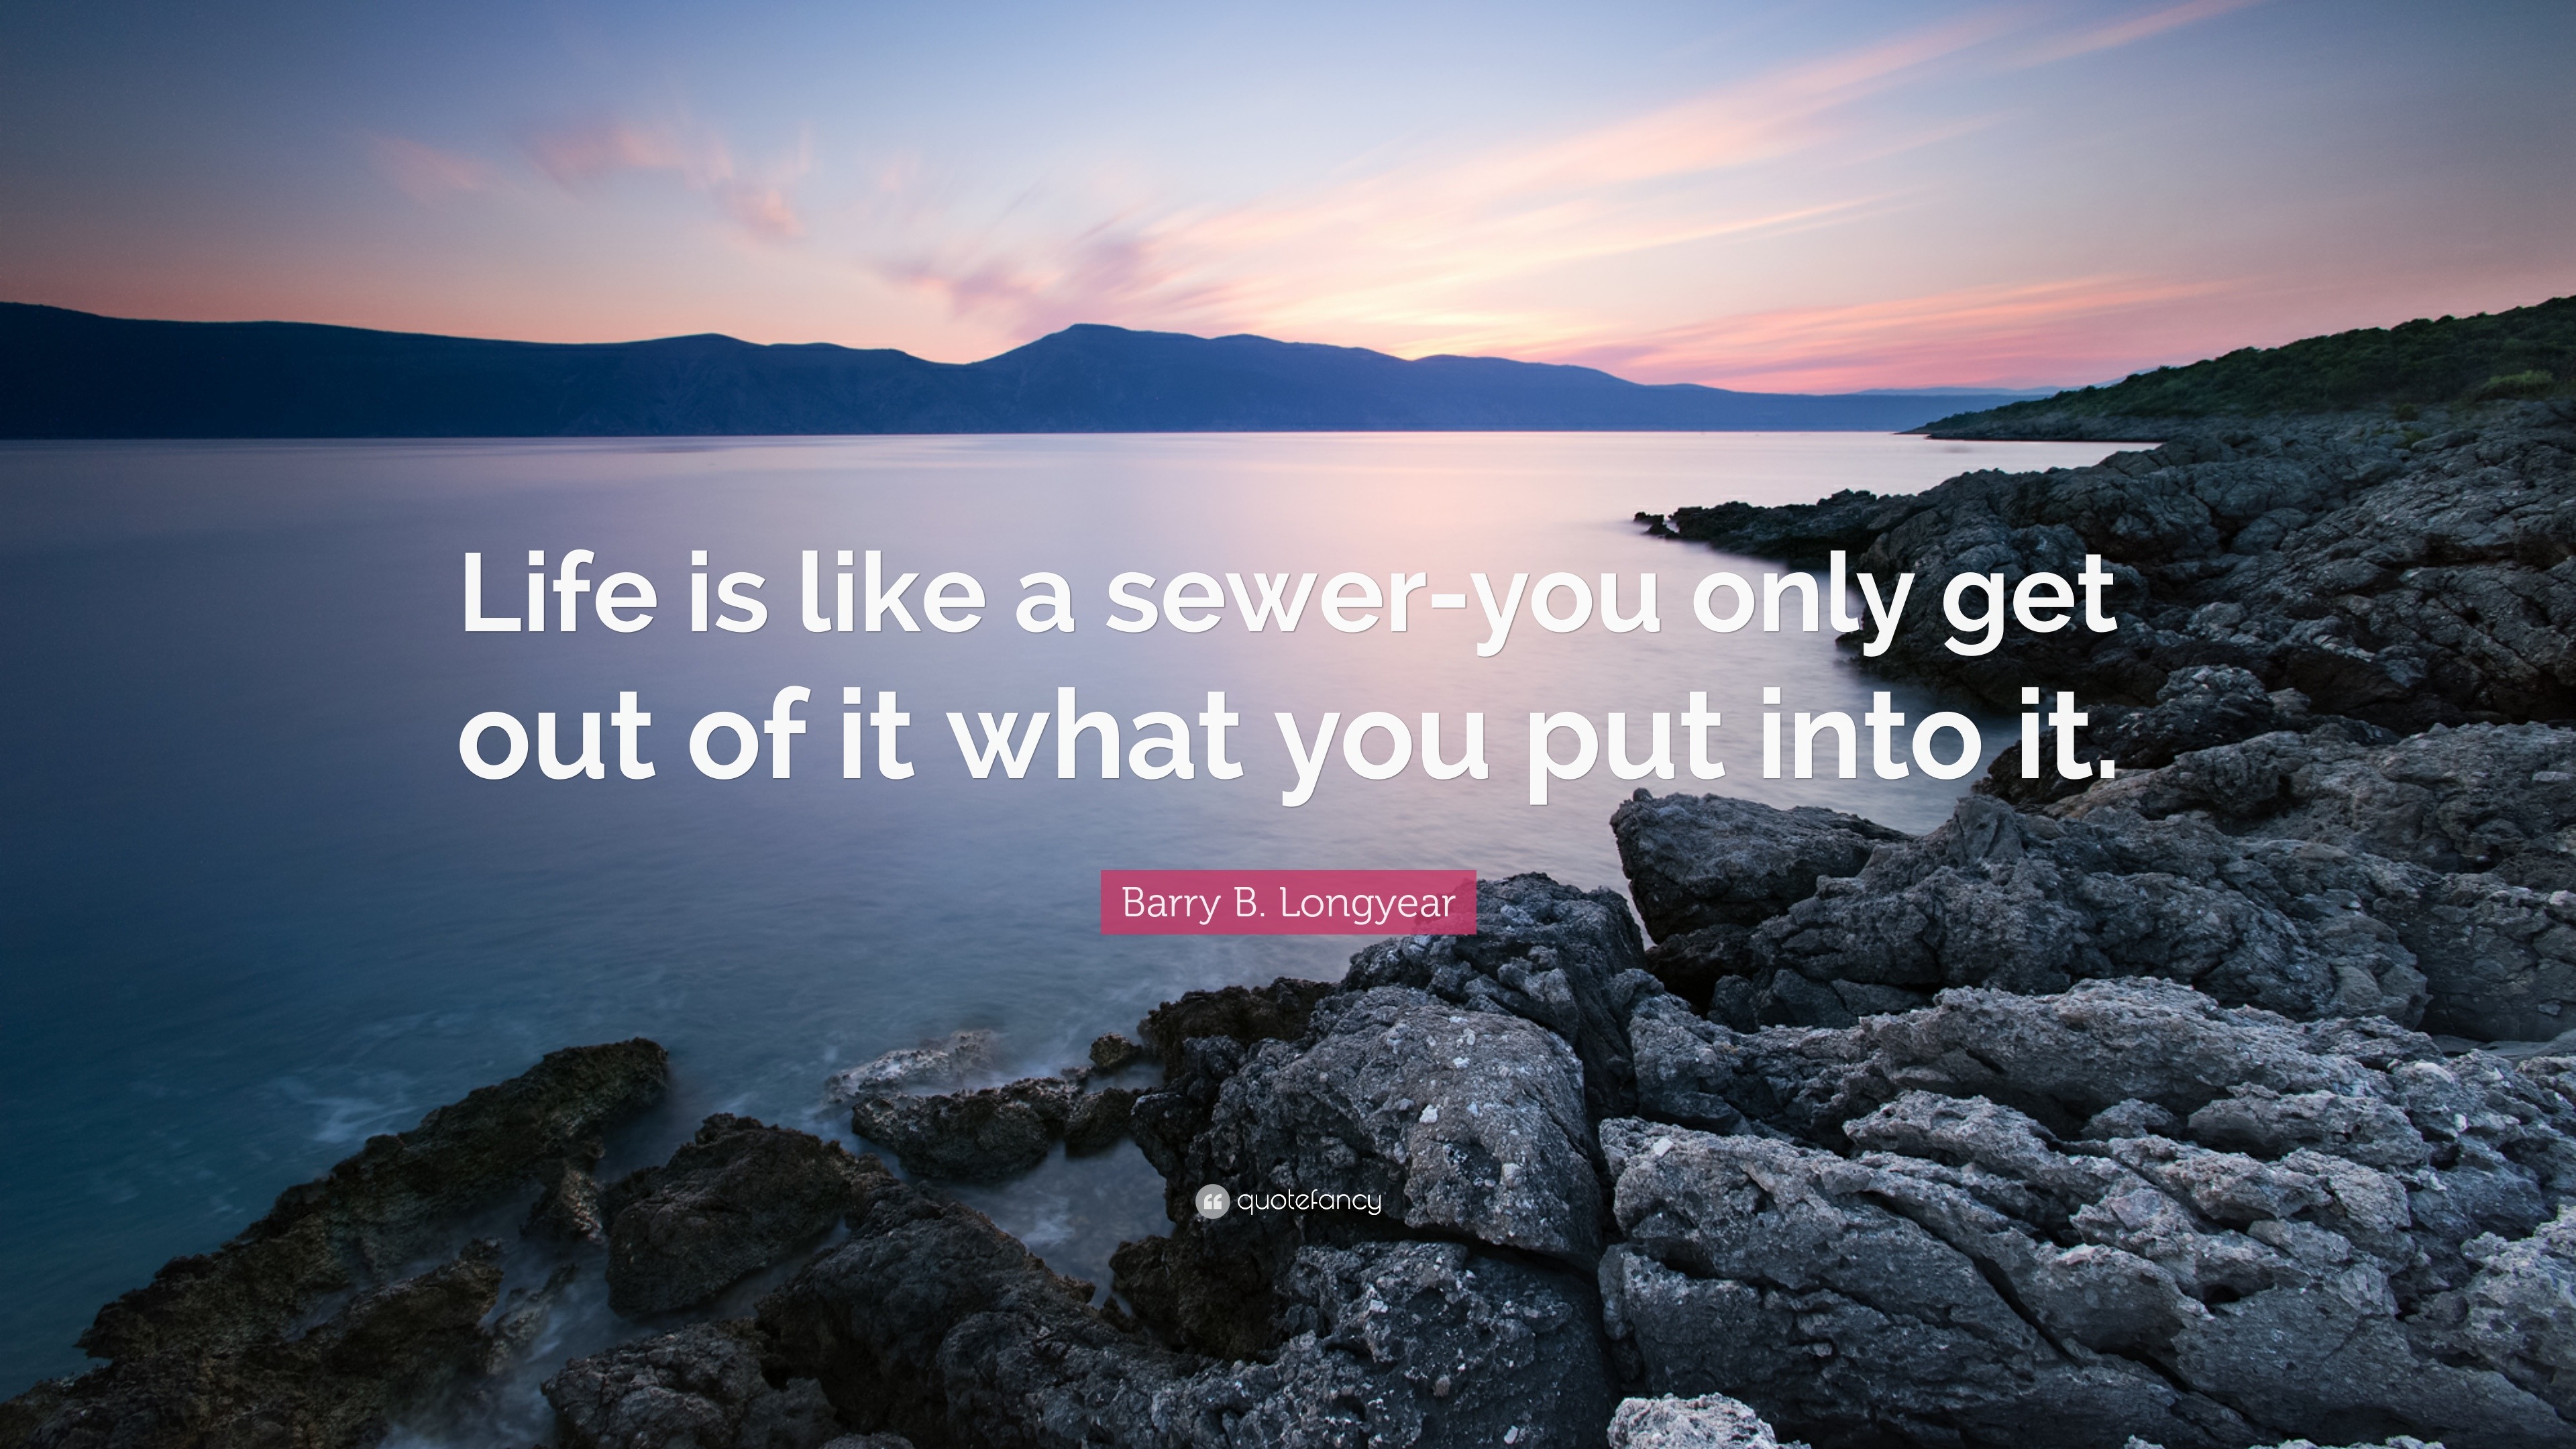 Barry B Longyear Quote Life Is Like A Sewer You Only Get Out Of It What You Put Into It 7 Wallpapers Quotefancy